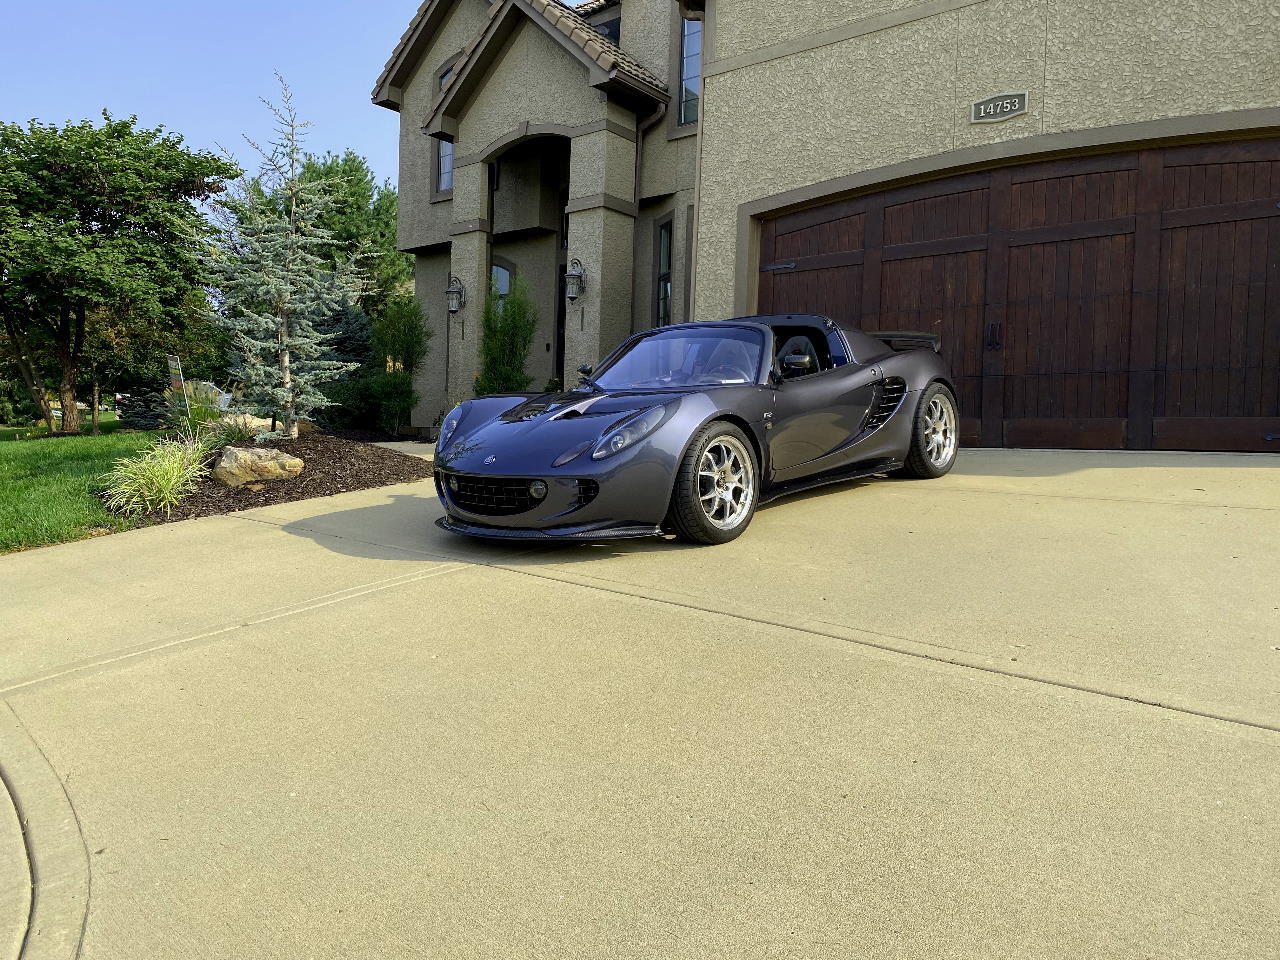 2005 Midnight Silver Lotus Elise LSS picture, mods, upgrades